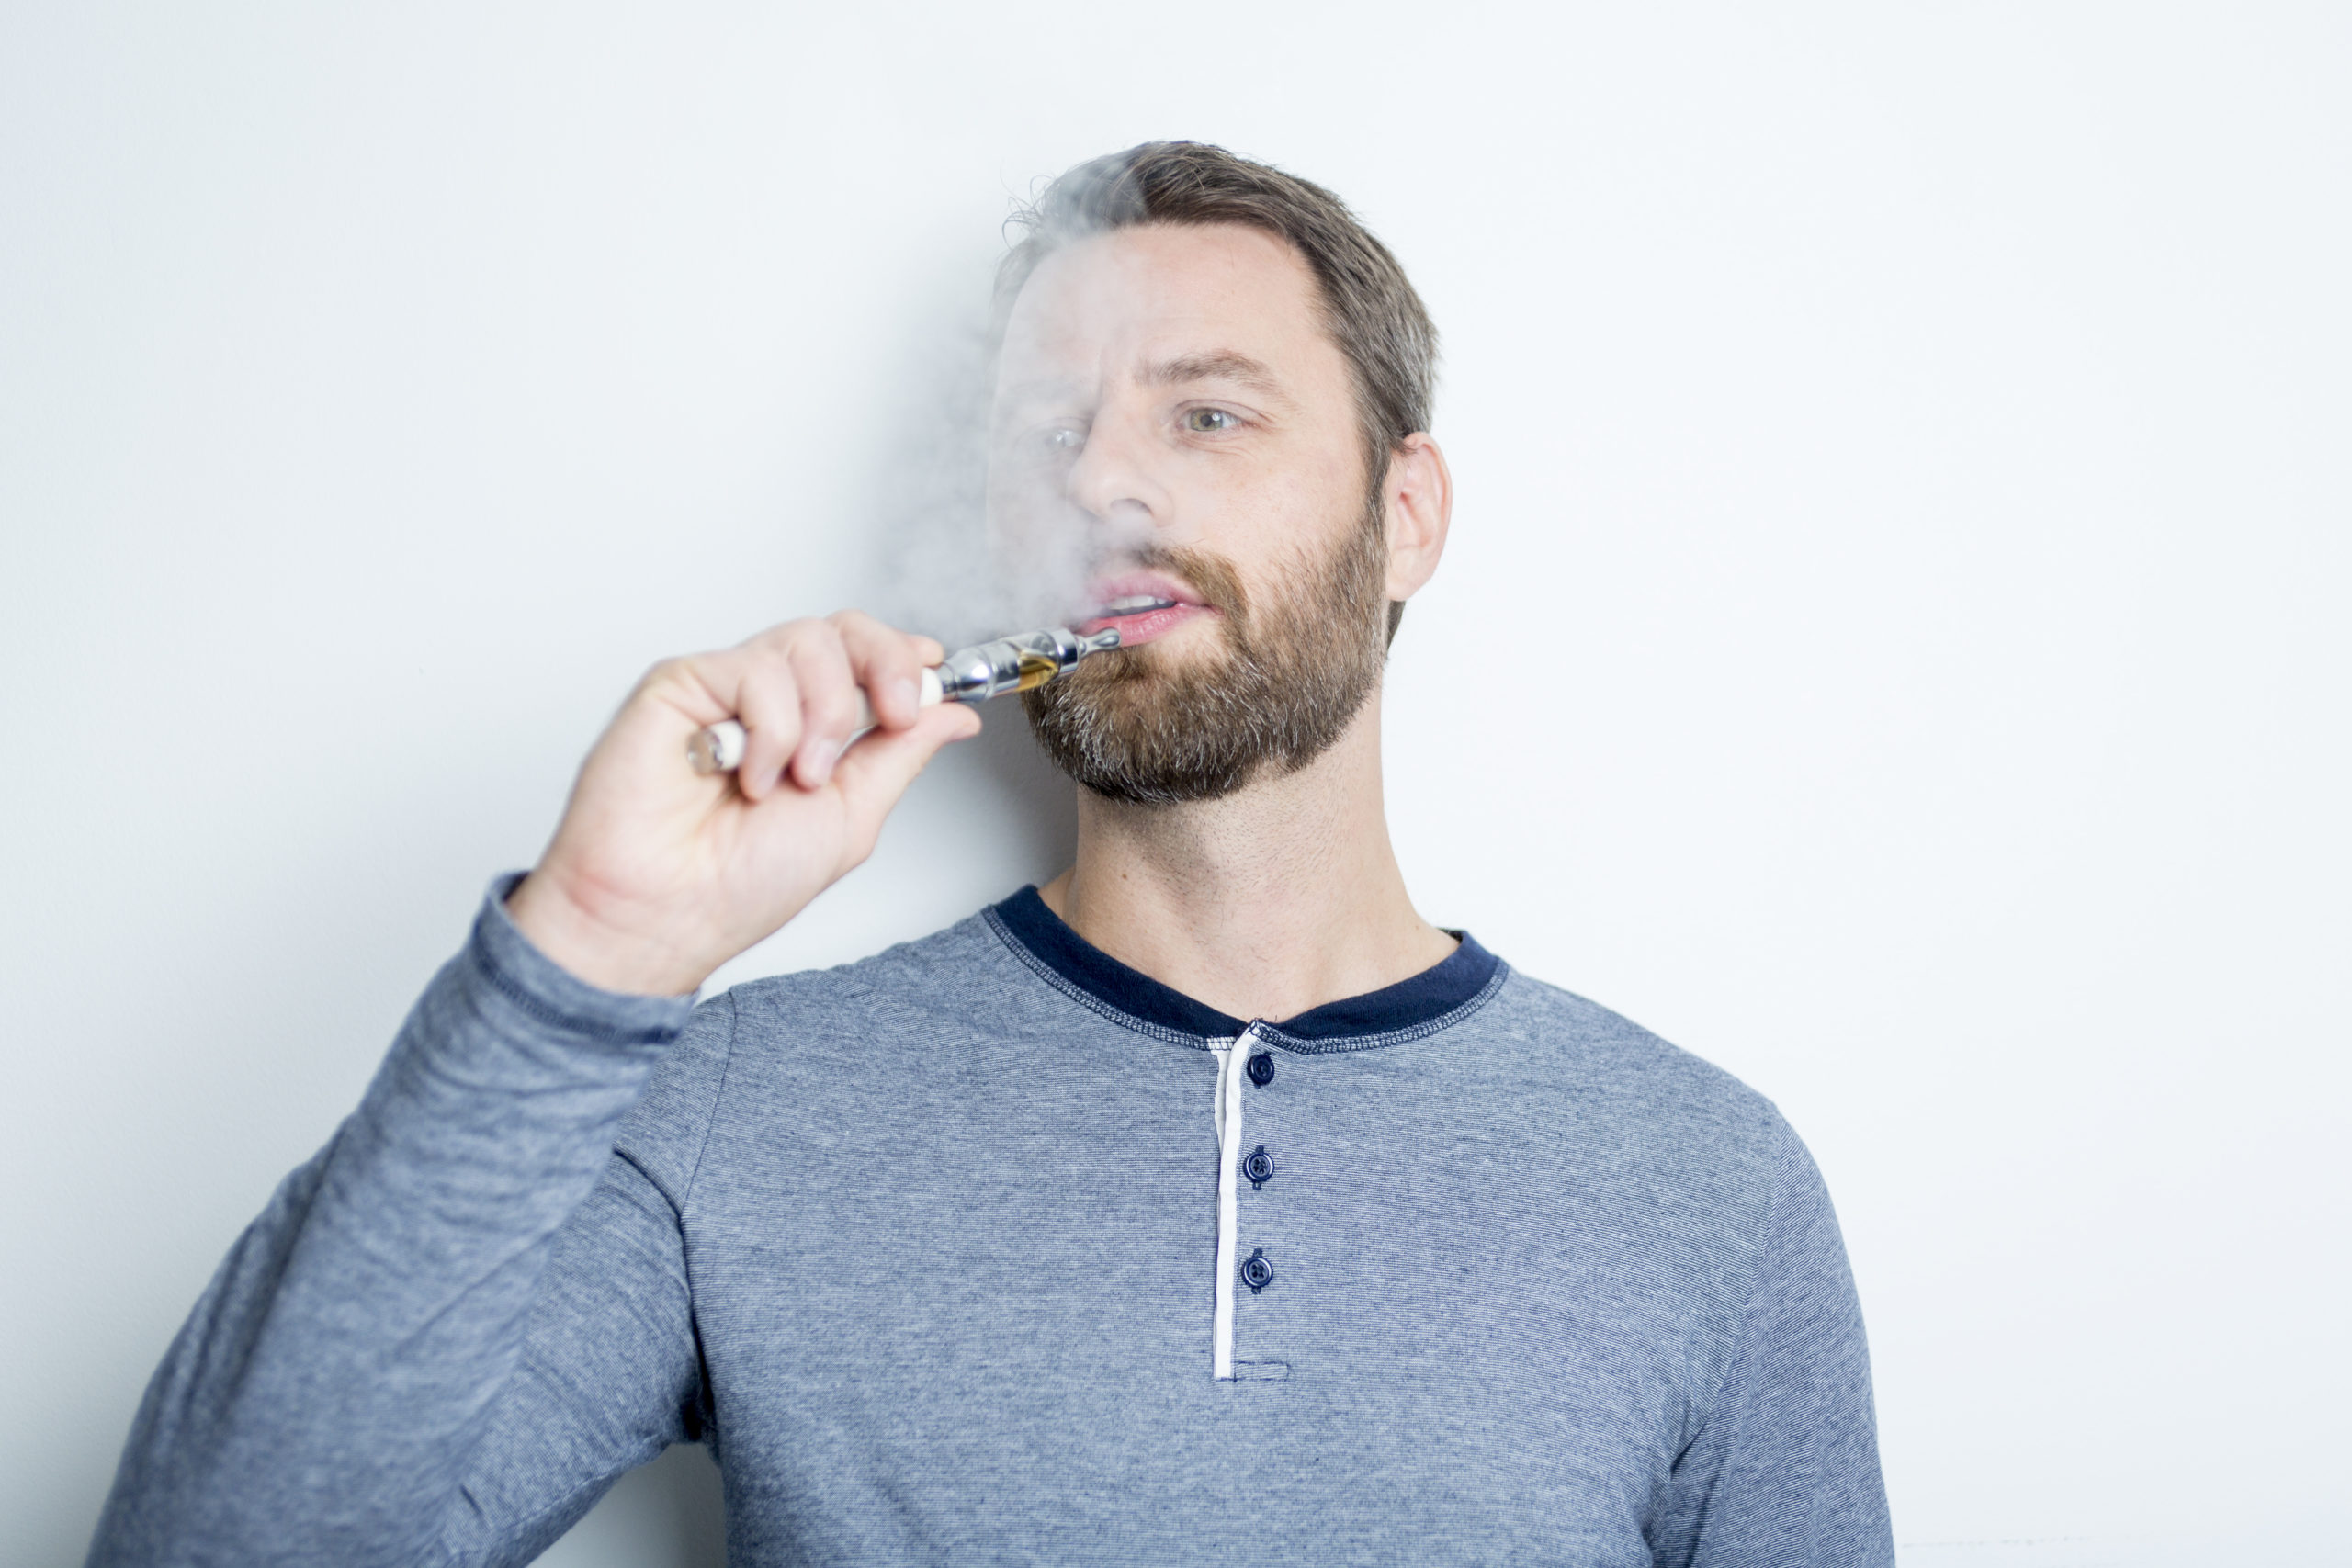 Vaping in the Workplace: A Bigger Issue Than You Think